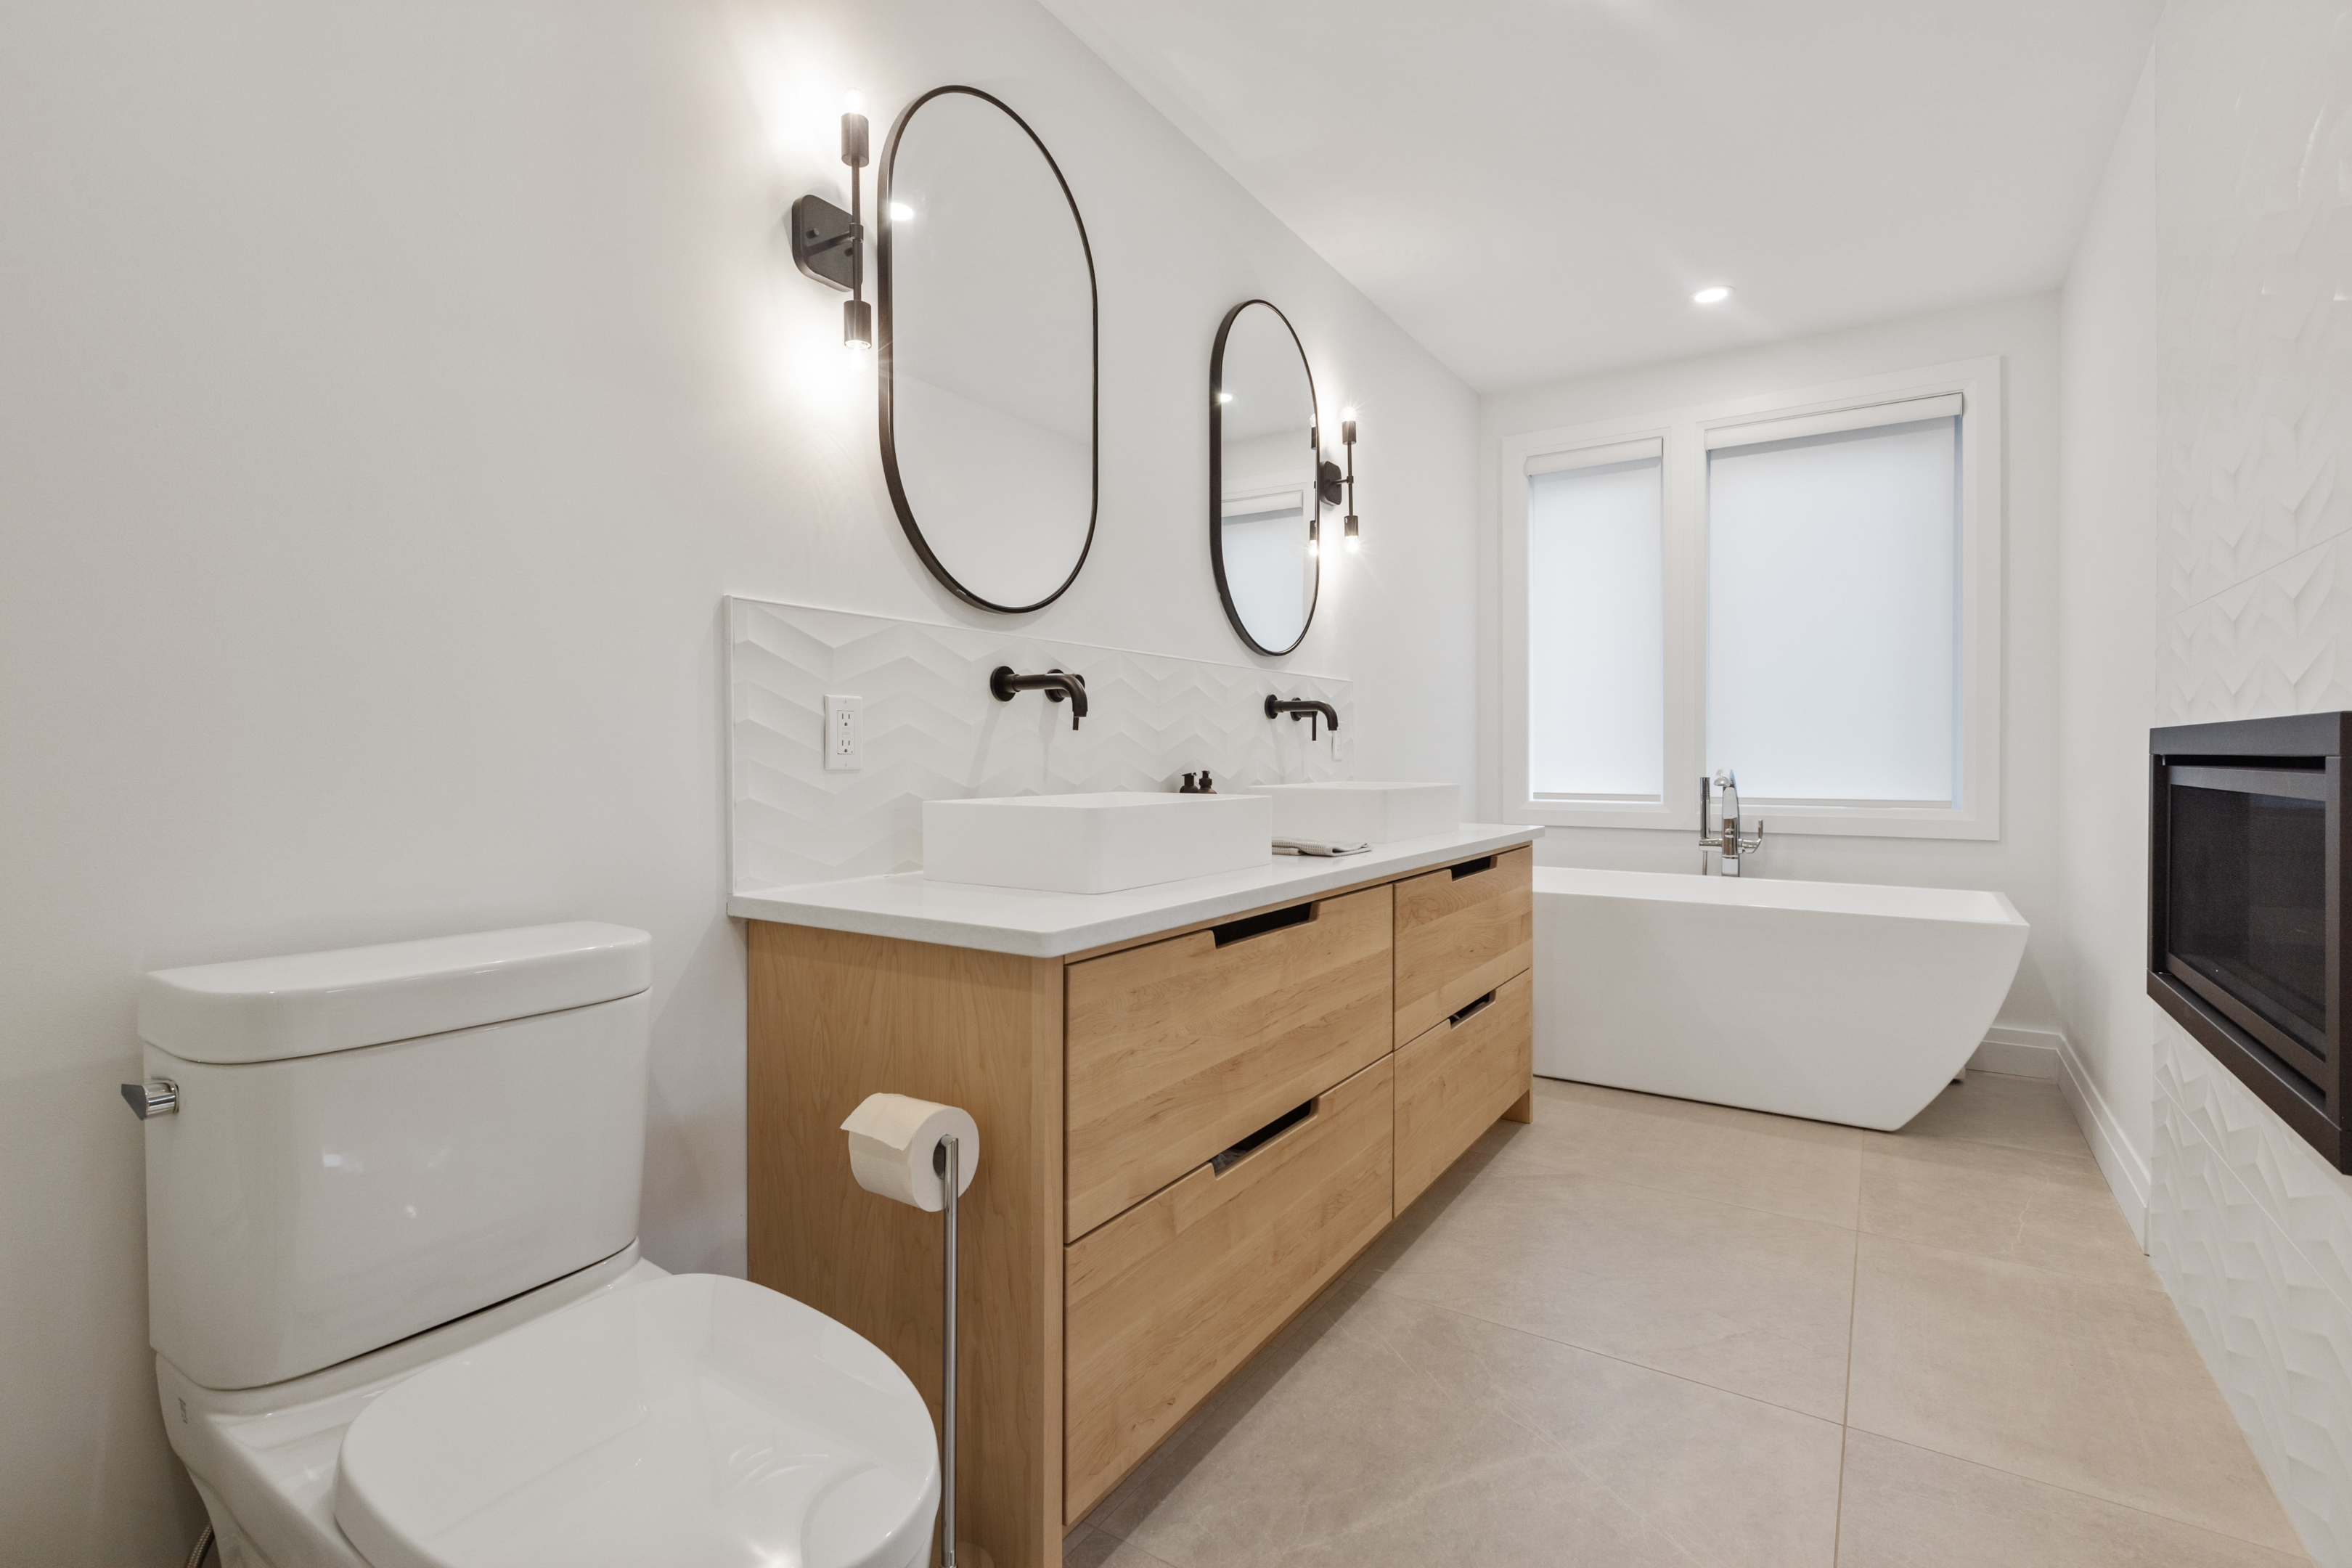 One-Day Bathroom Remodel Tips and Considerations